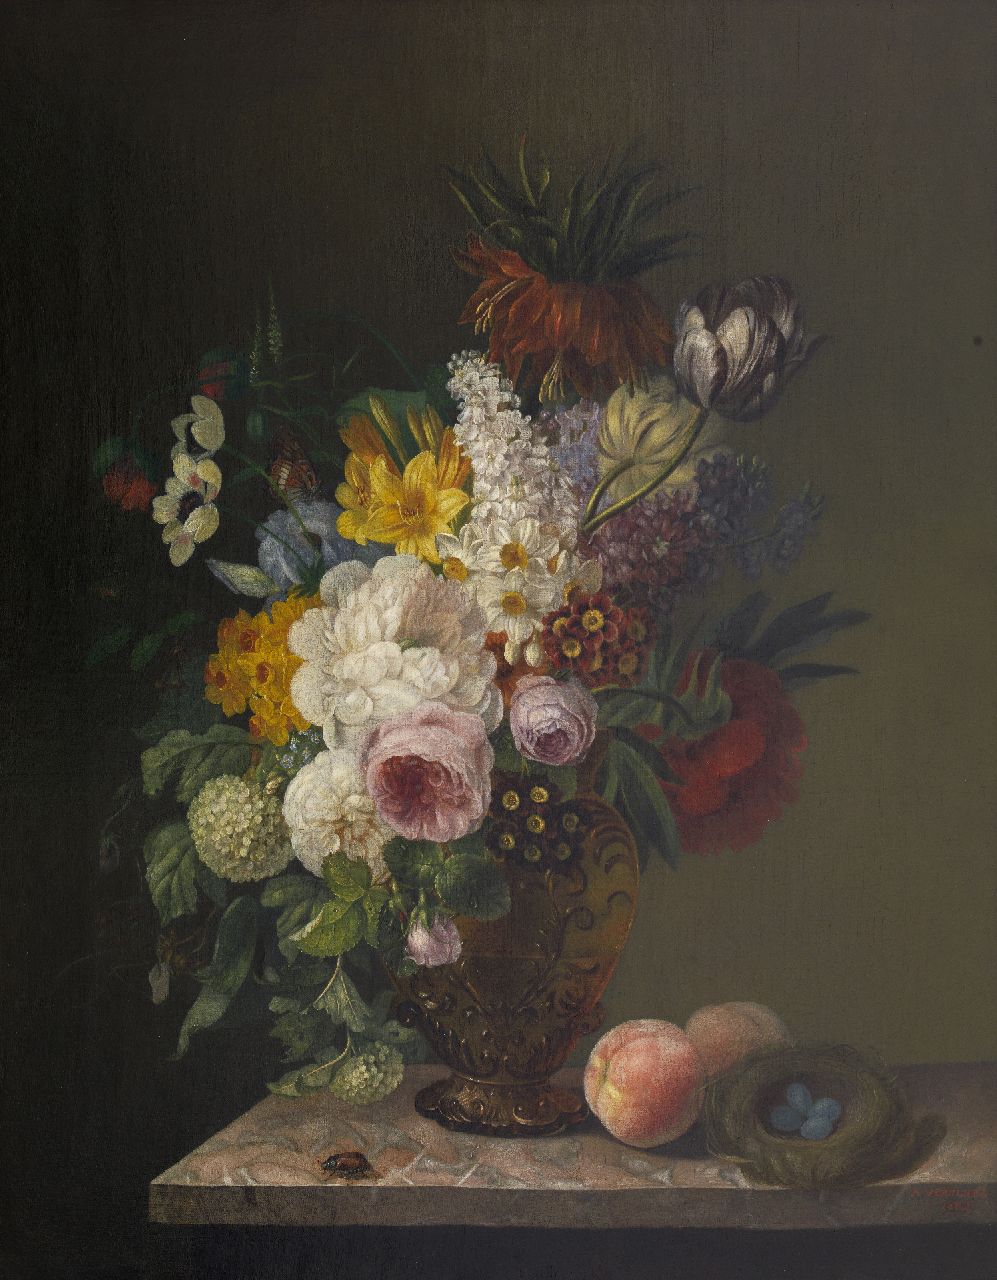 Augustine Vervloet | Flowers in a vase with insect and a bird's nest, oil on canvas, 80.4 x 64.4 cm, signed l.r. and dated 1888